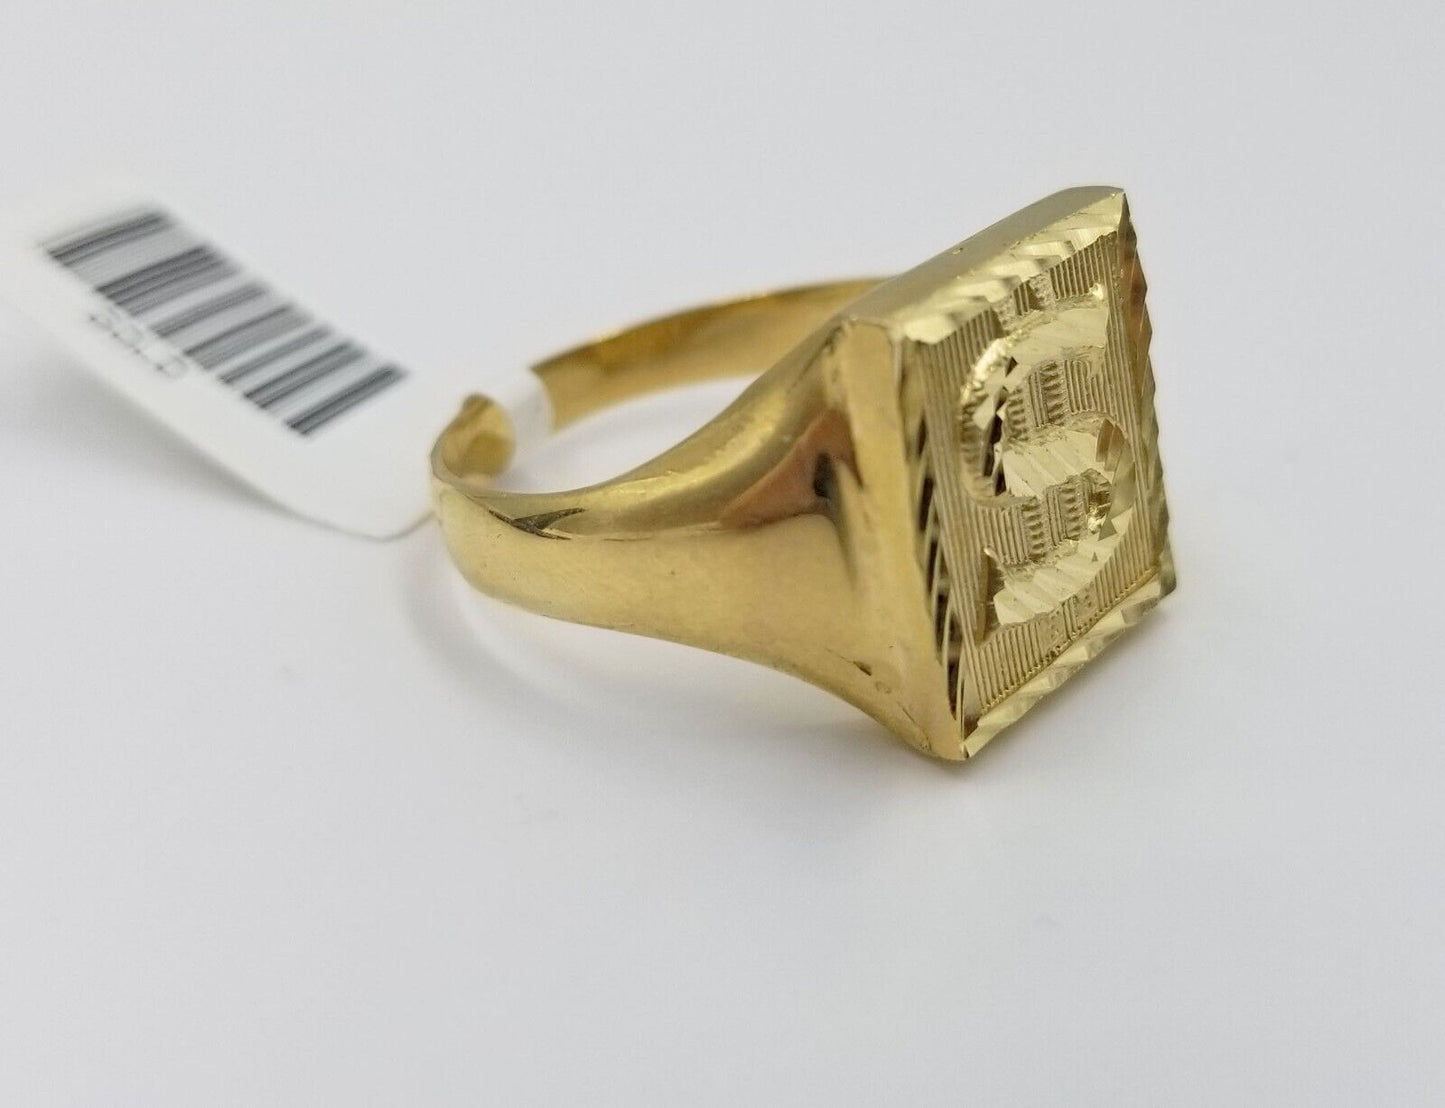 Real 10k Gold Men's Ring Dollar Sign size 10 10kt Yellow gold, casual pinky Band